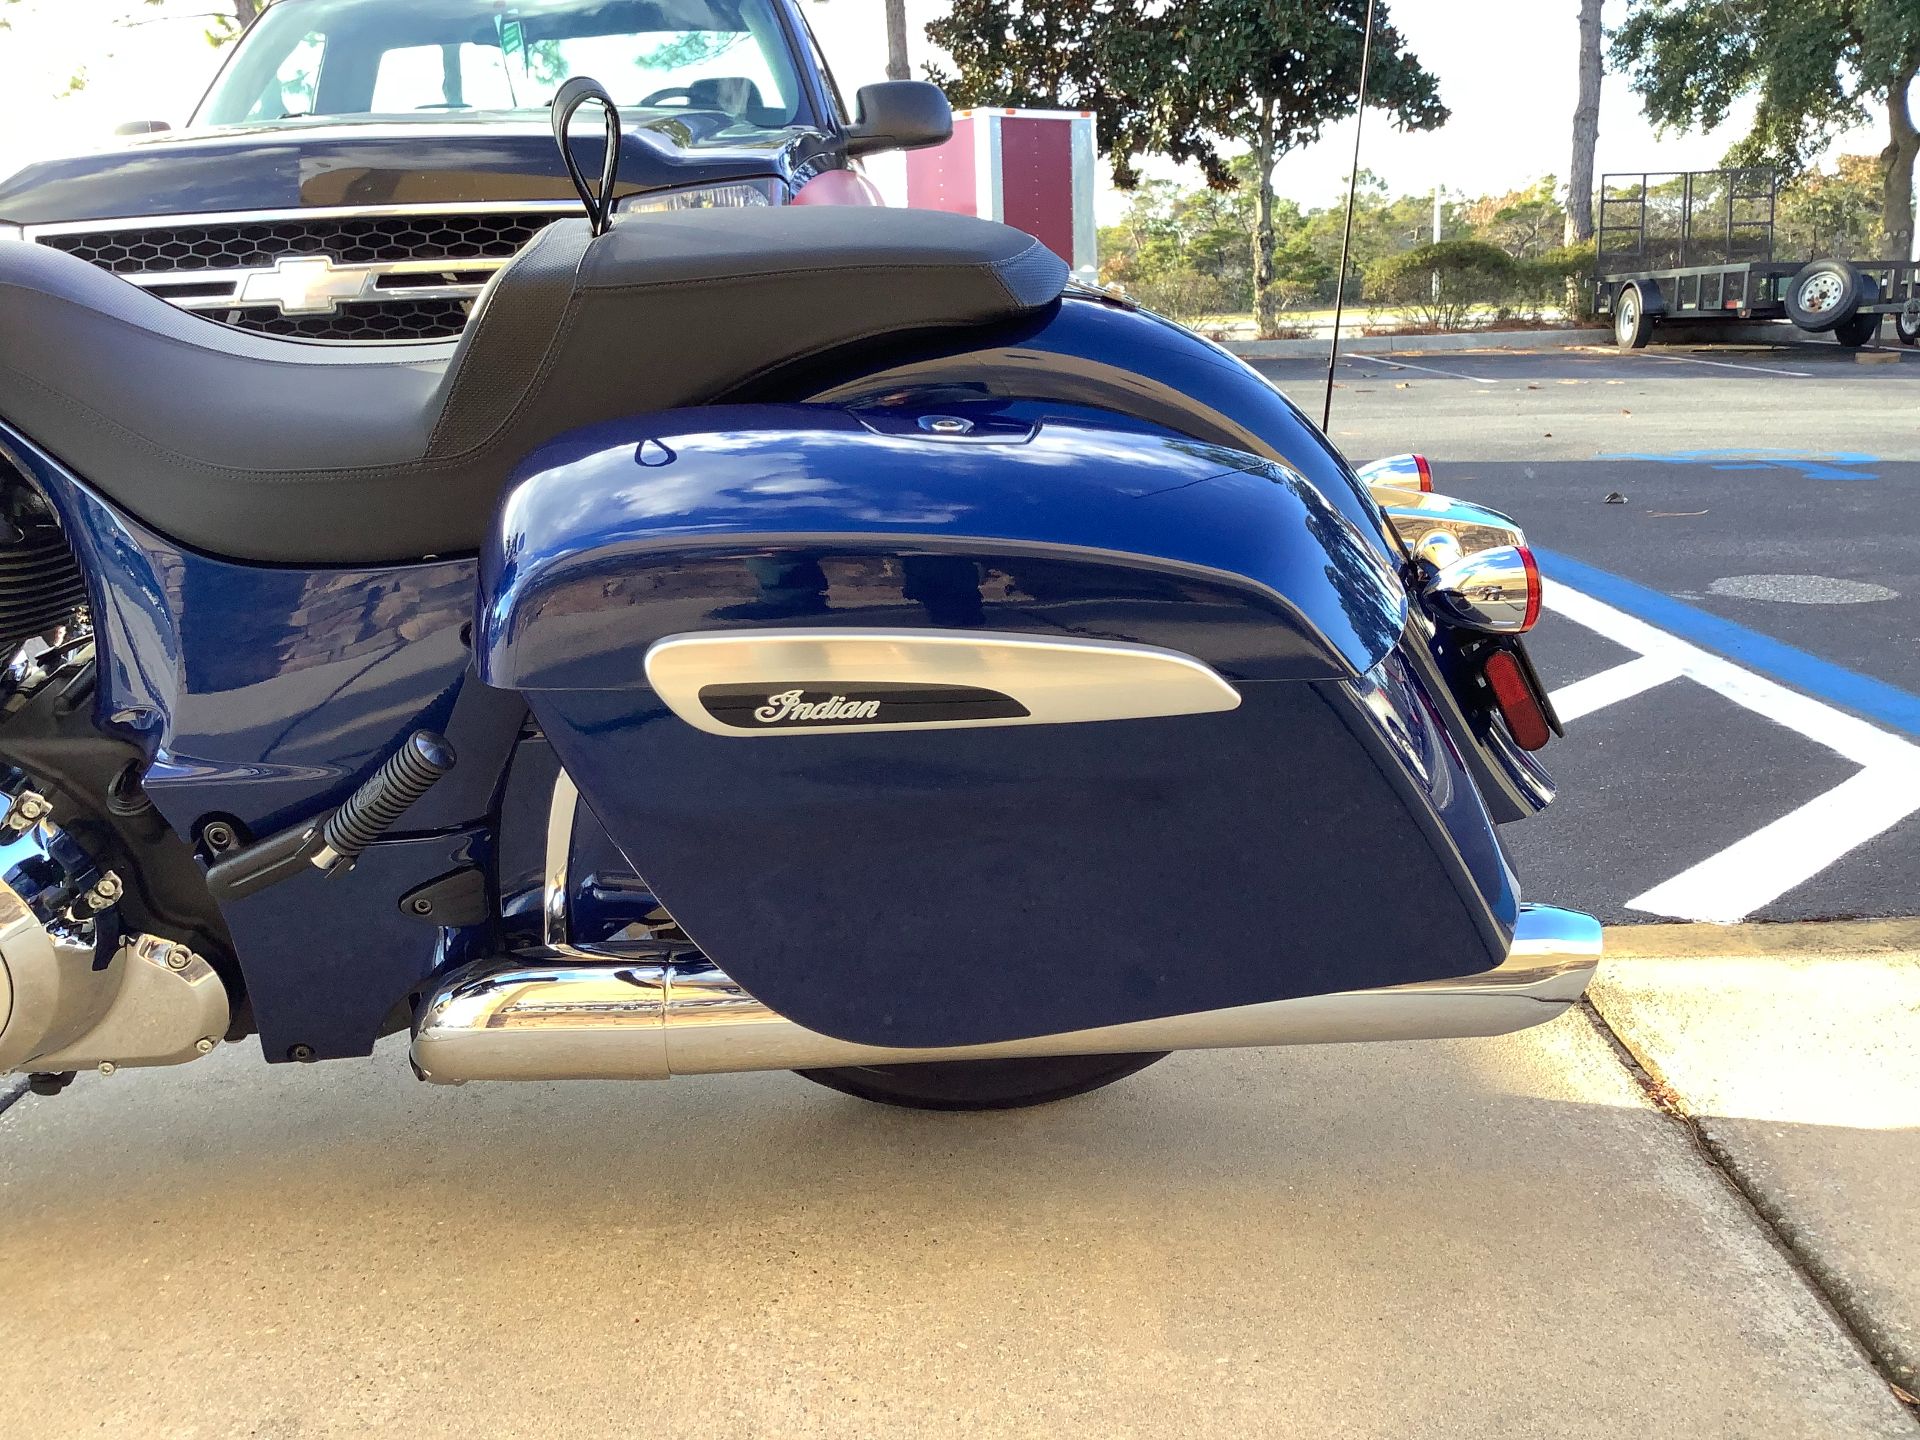 2022 Indian CHIEFTAIN LIMITED in Panama City Beach, Florida - Photo 9